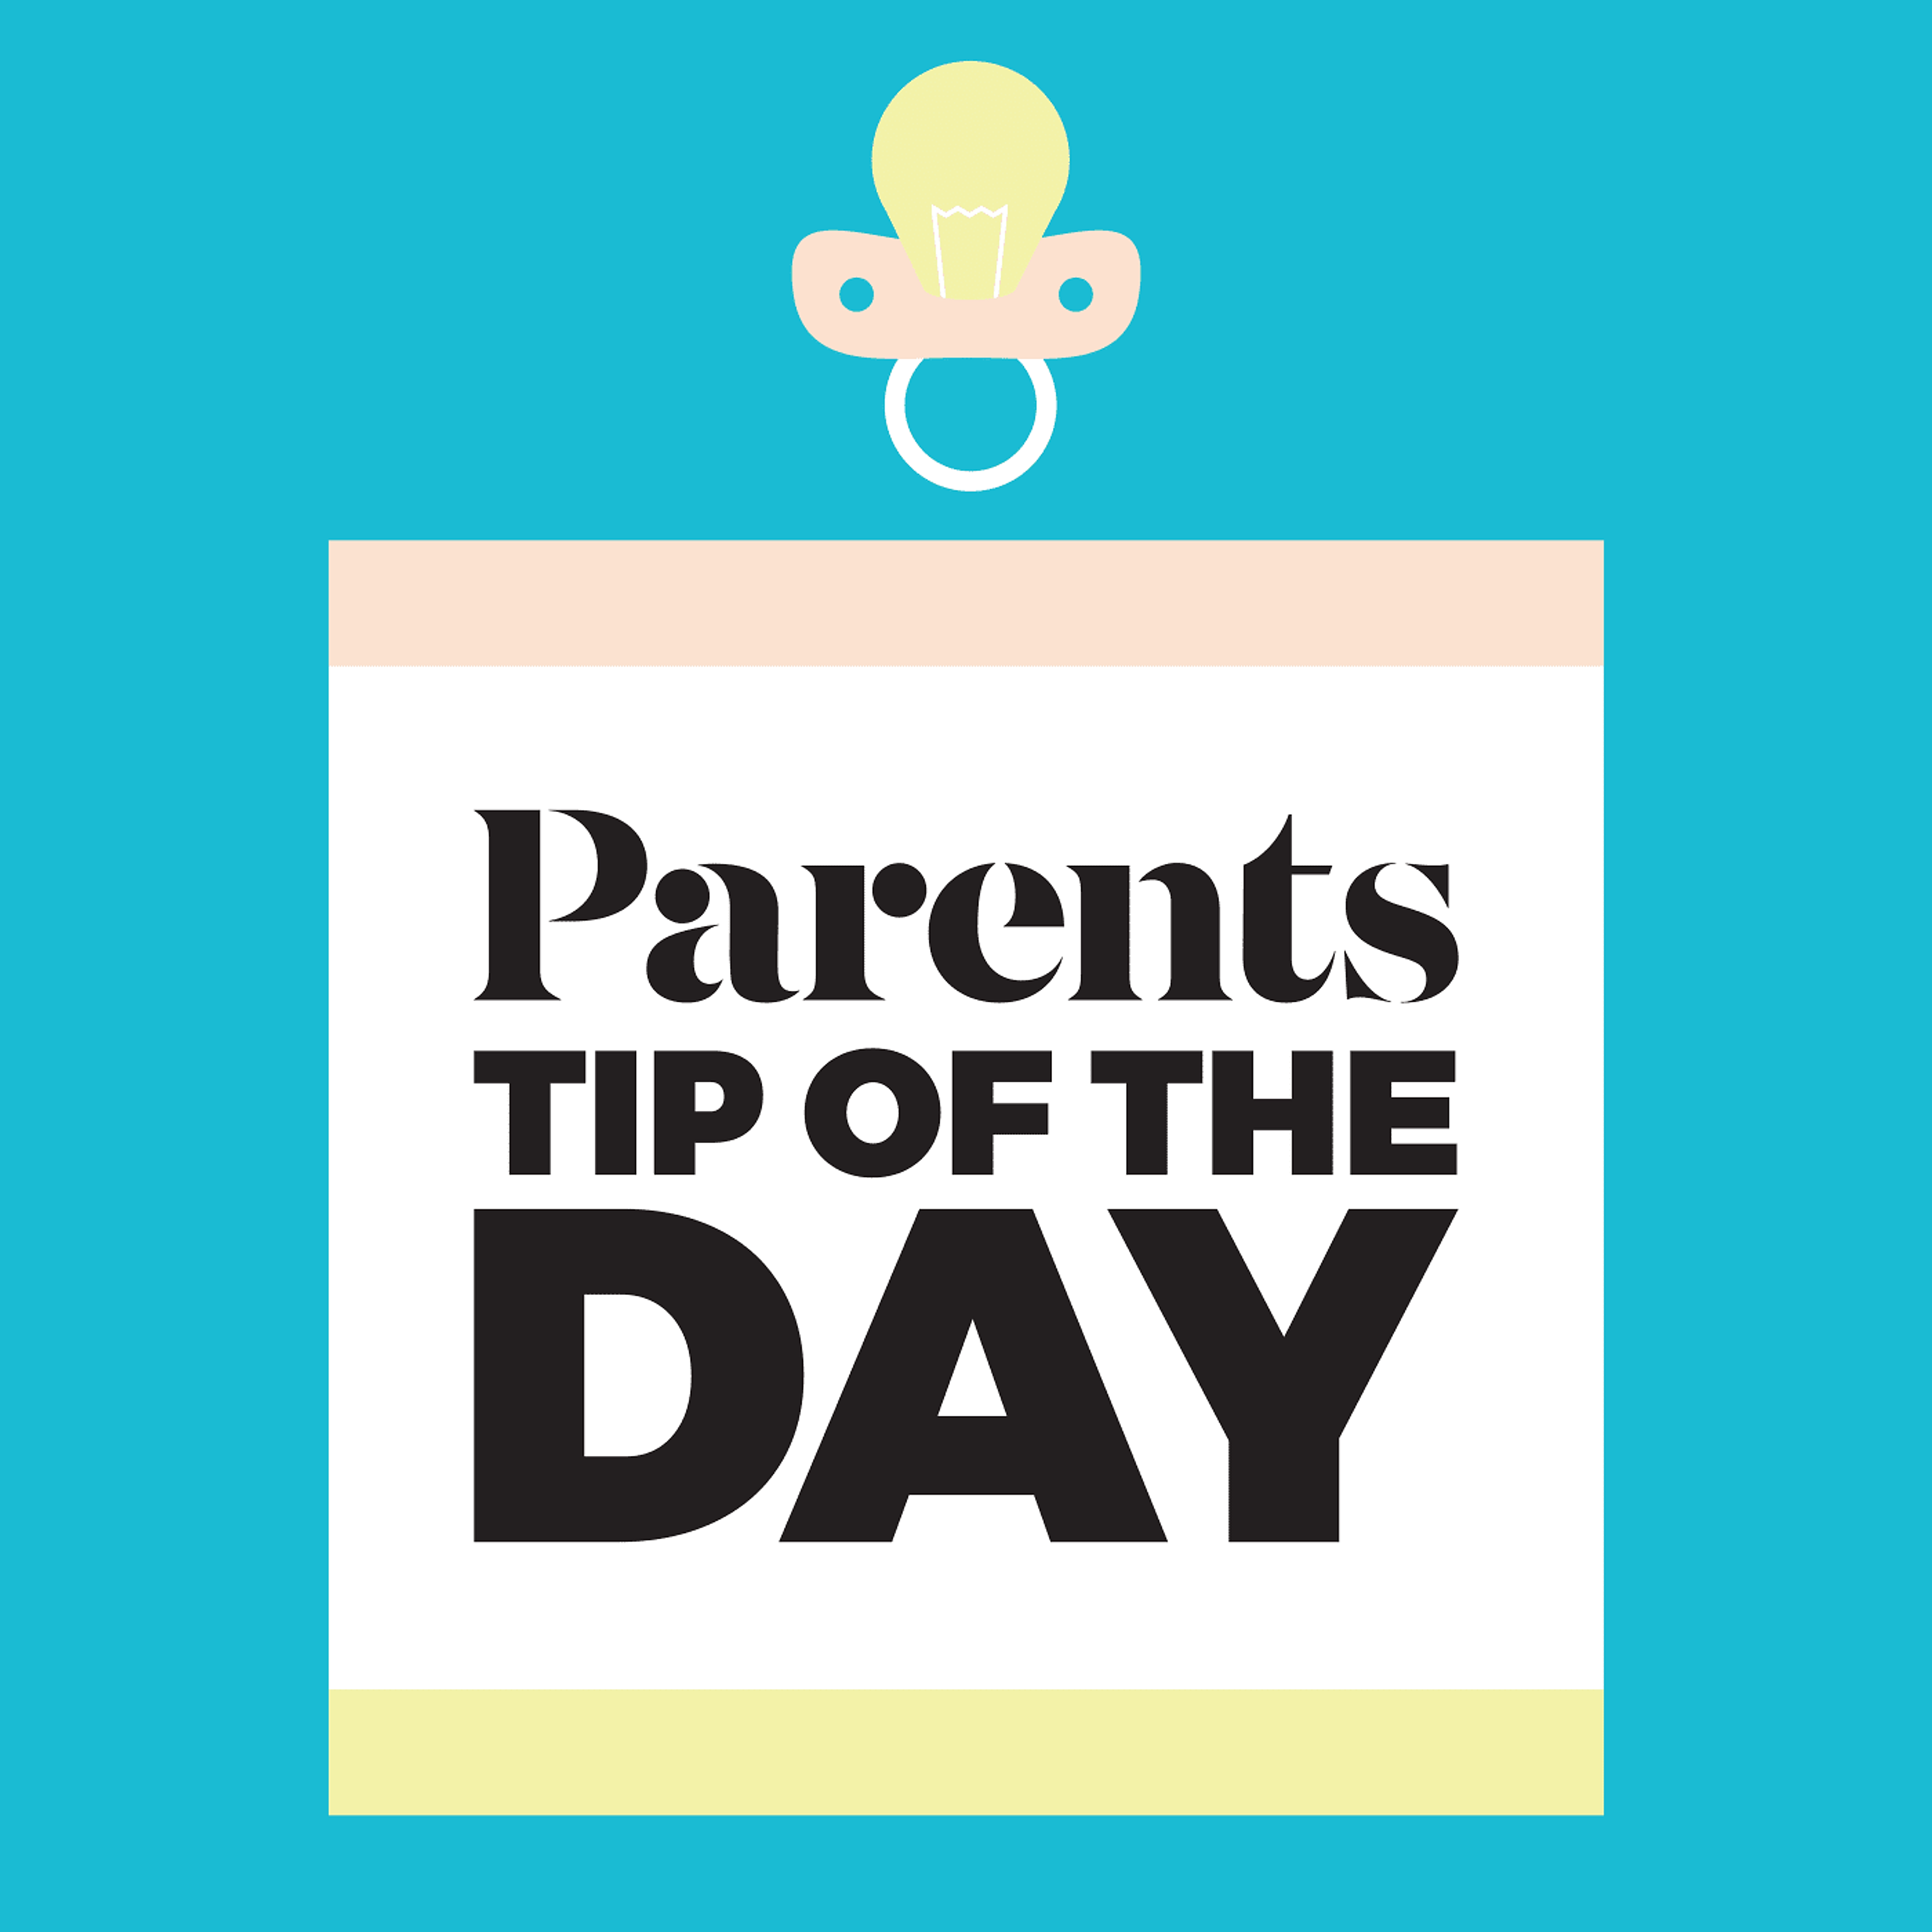 Parents Tip of the Day cover image